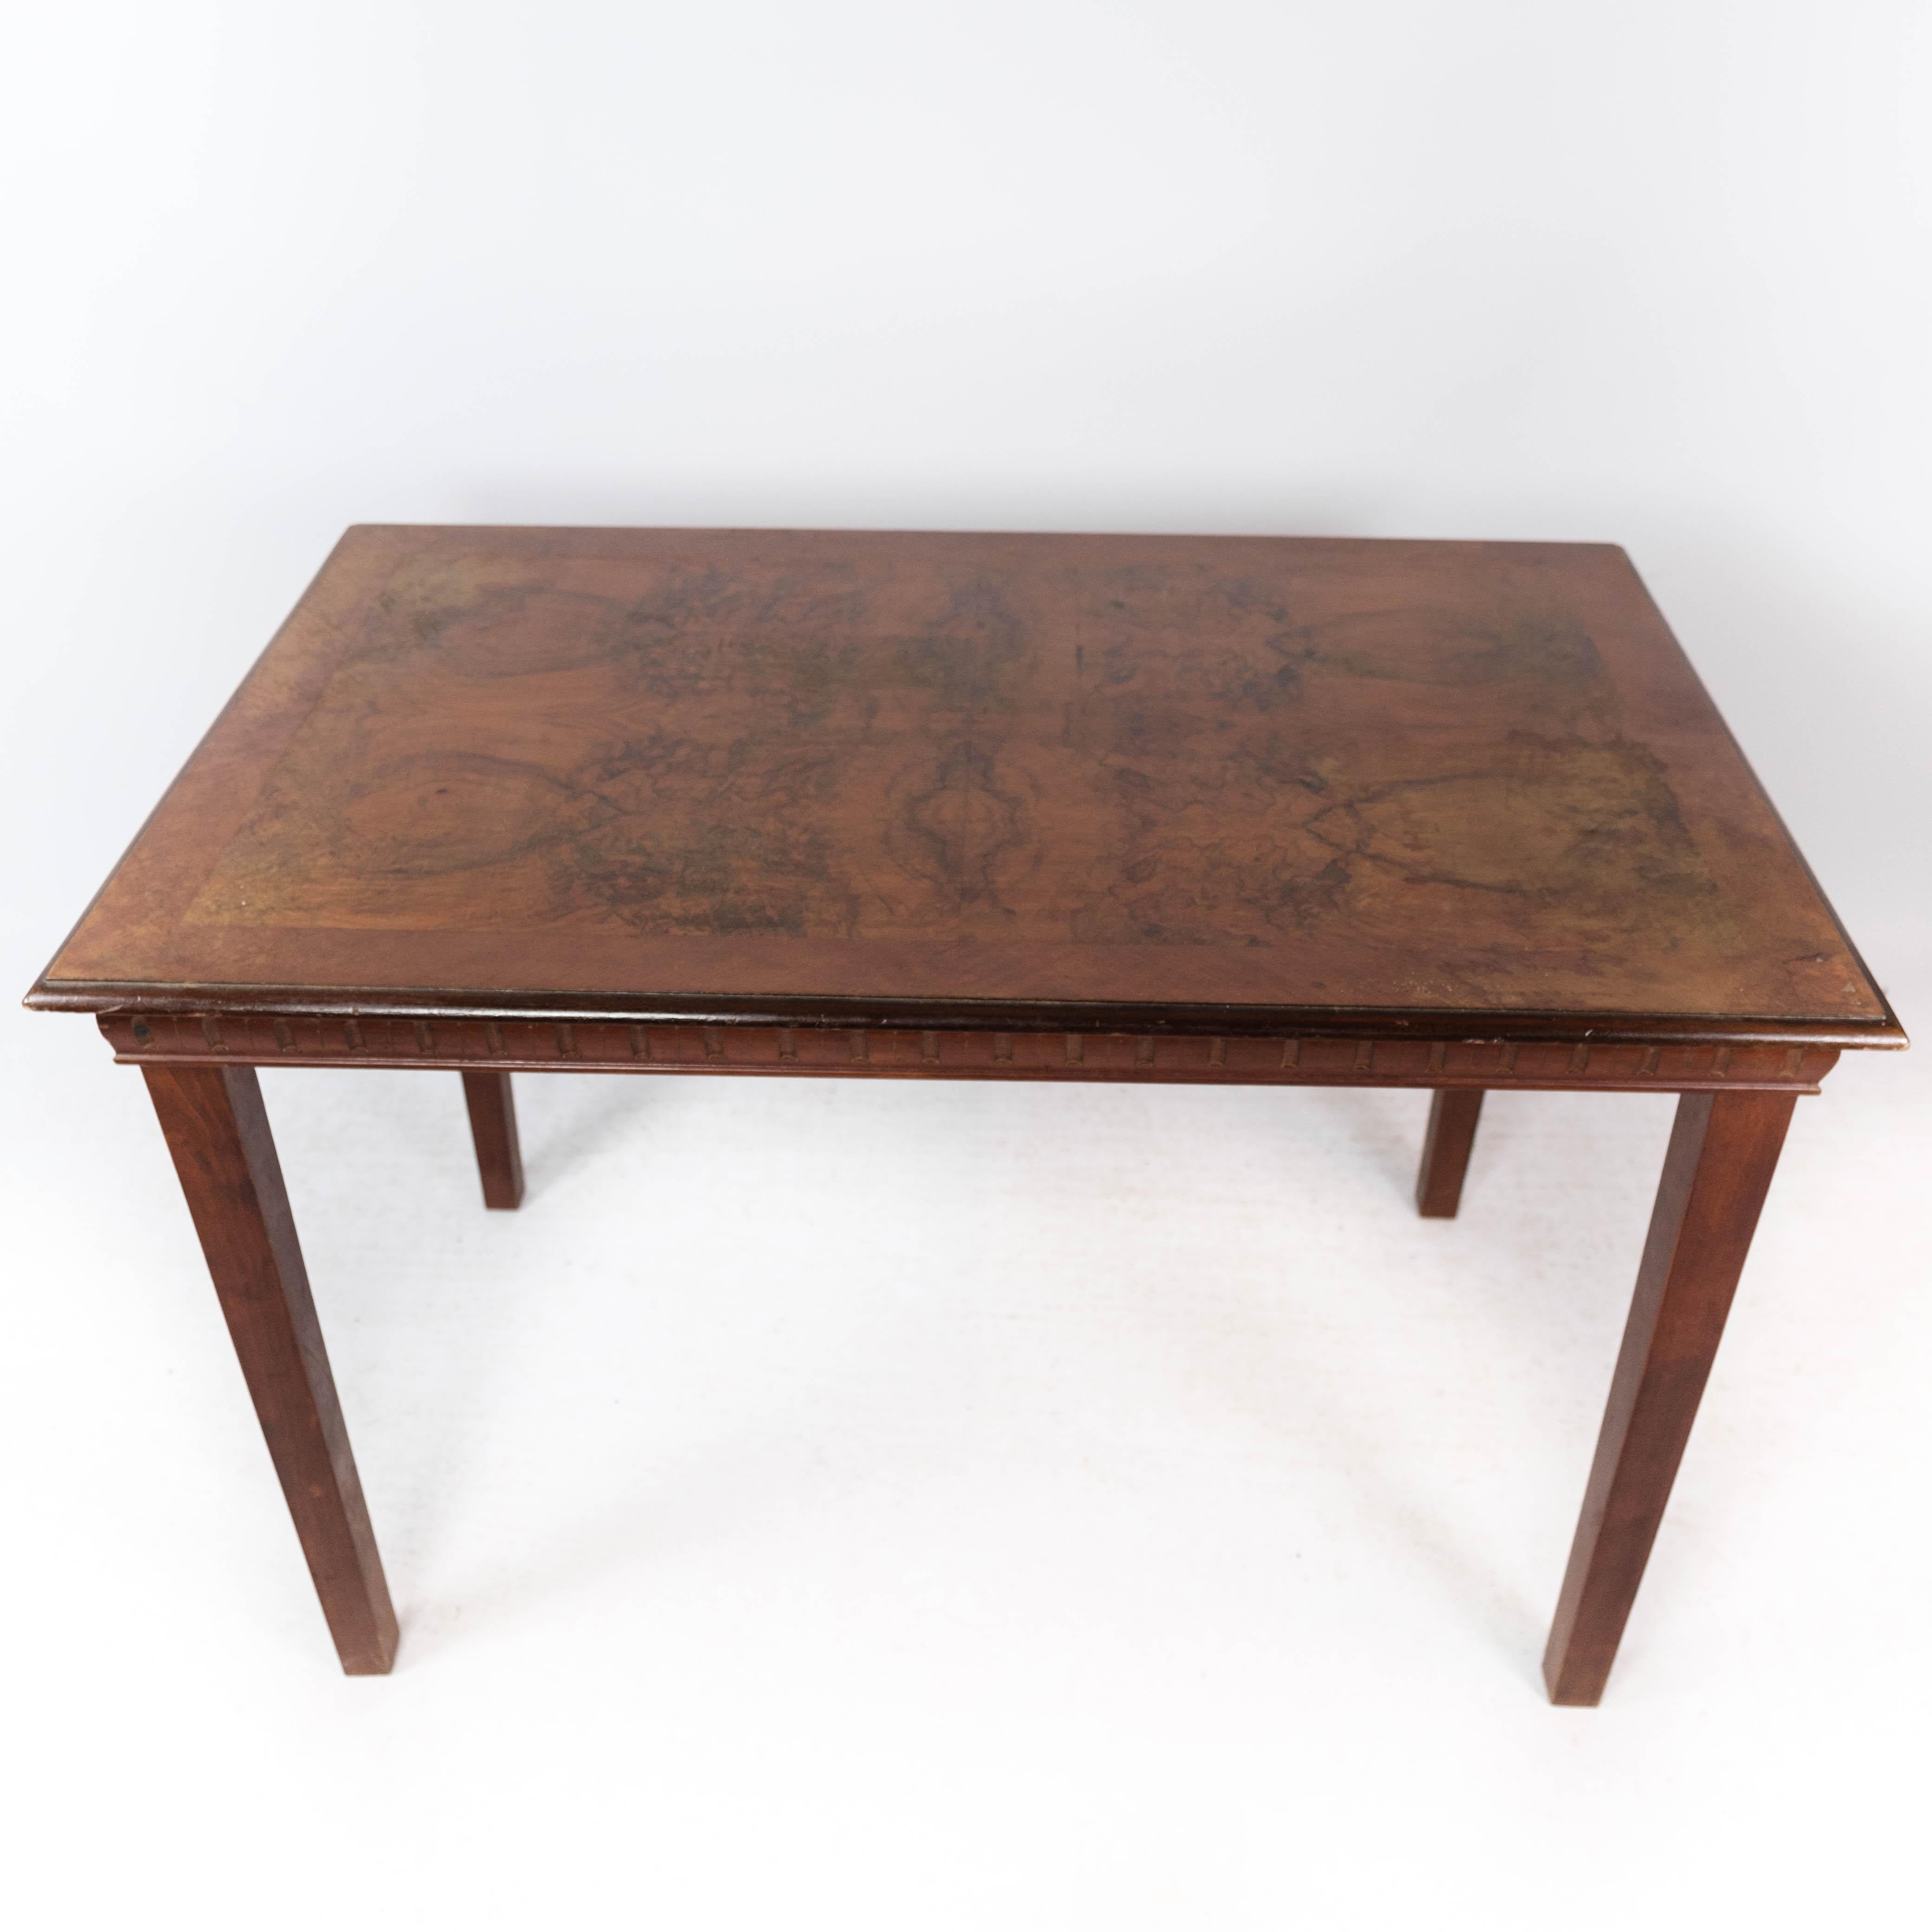 The dining/coffee table crafted from walnut and dating back to around 1890 is a remarkable piece of antique furniture that exudes elegance and timeless charm.

Walnut, known for its rich color and beautiful grain patterns, lends a sense of warmth